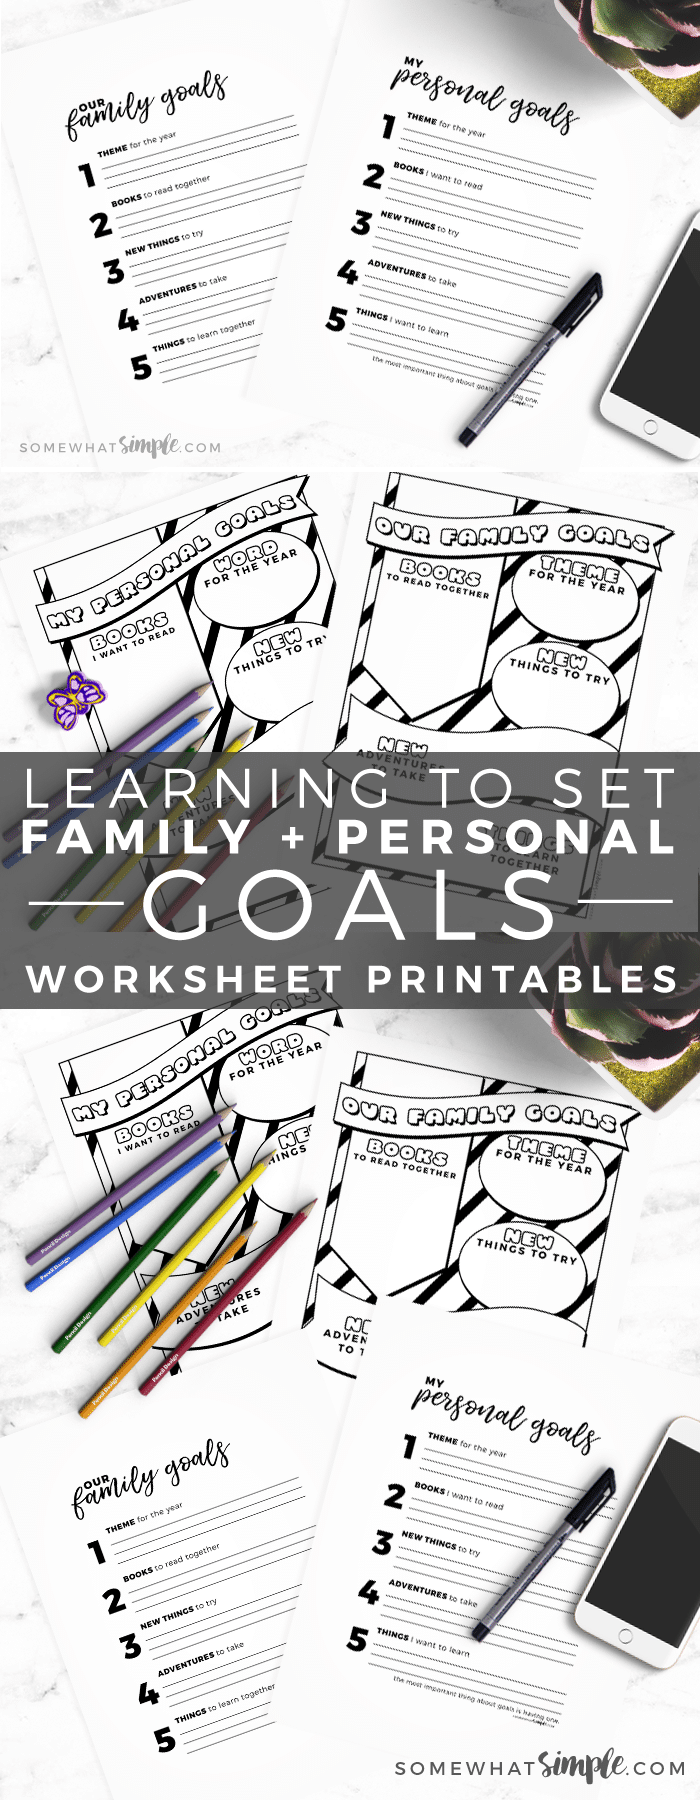 The New Year is a great opportunity to sit down with your family and make some goals together.  These Family Goals and Personal Goals printable worksheets will make the process fun and easy! via @somewhatsimple